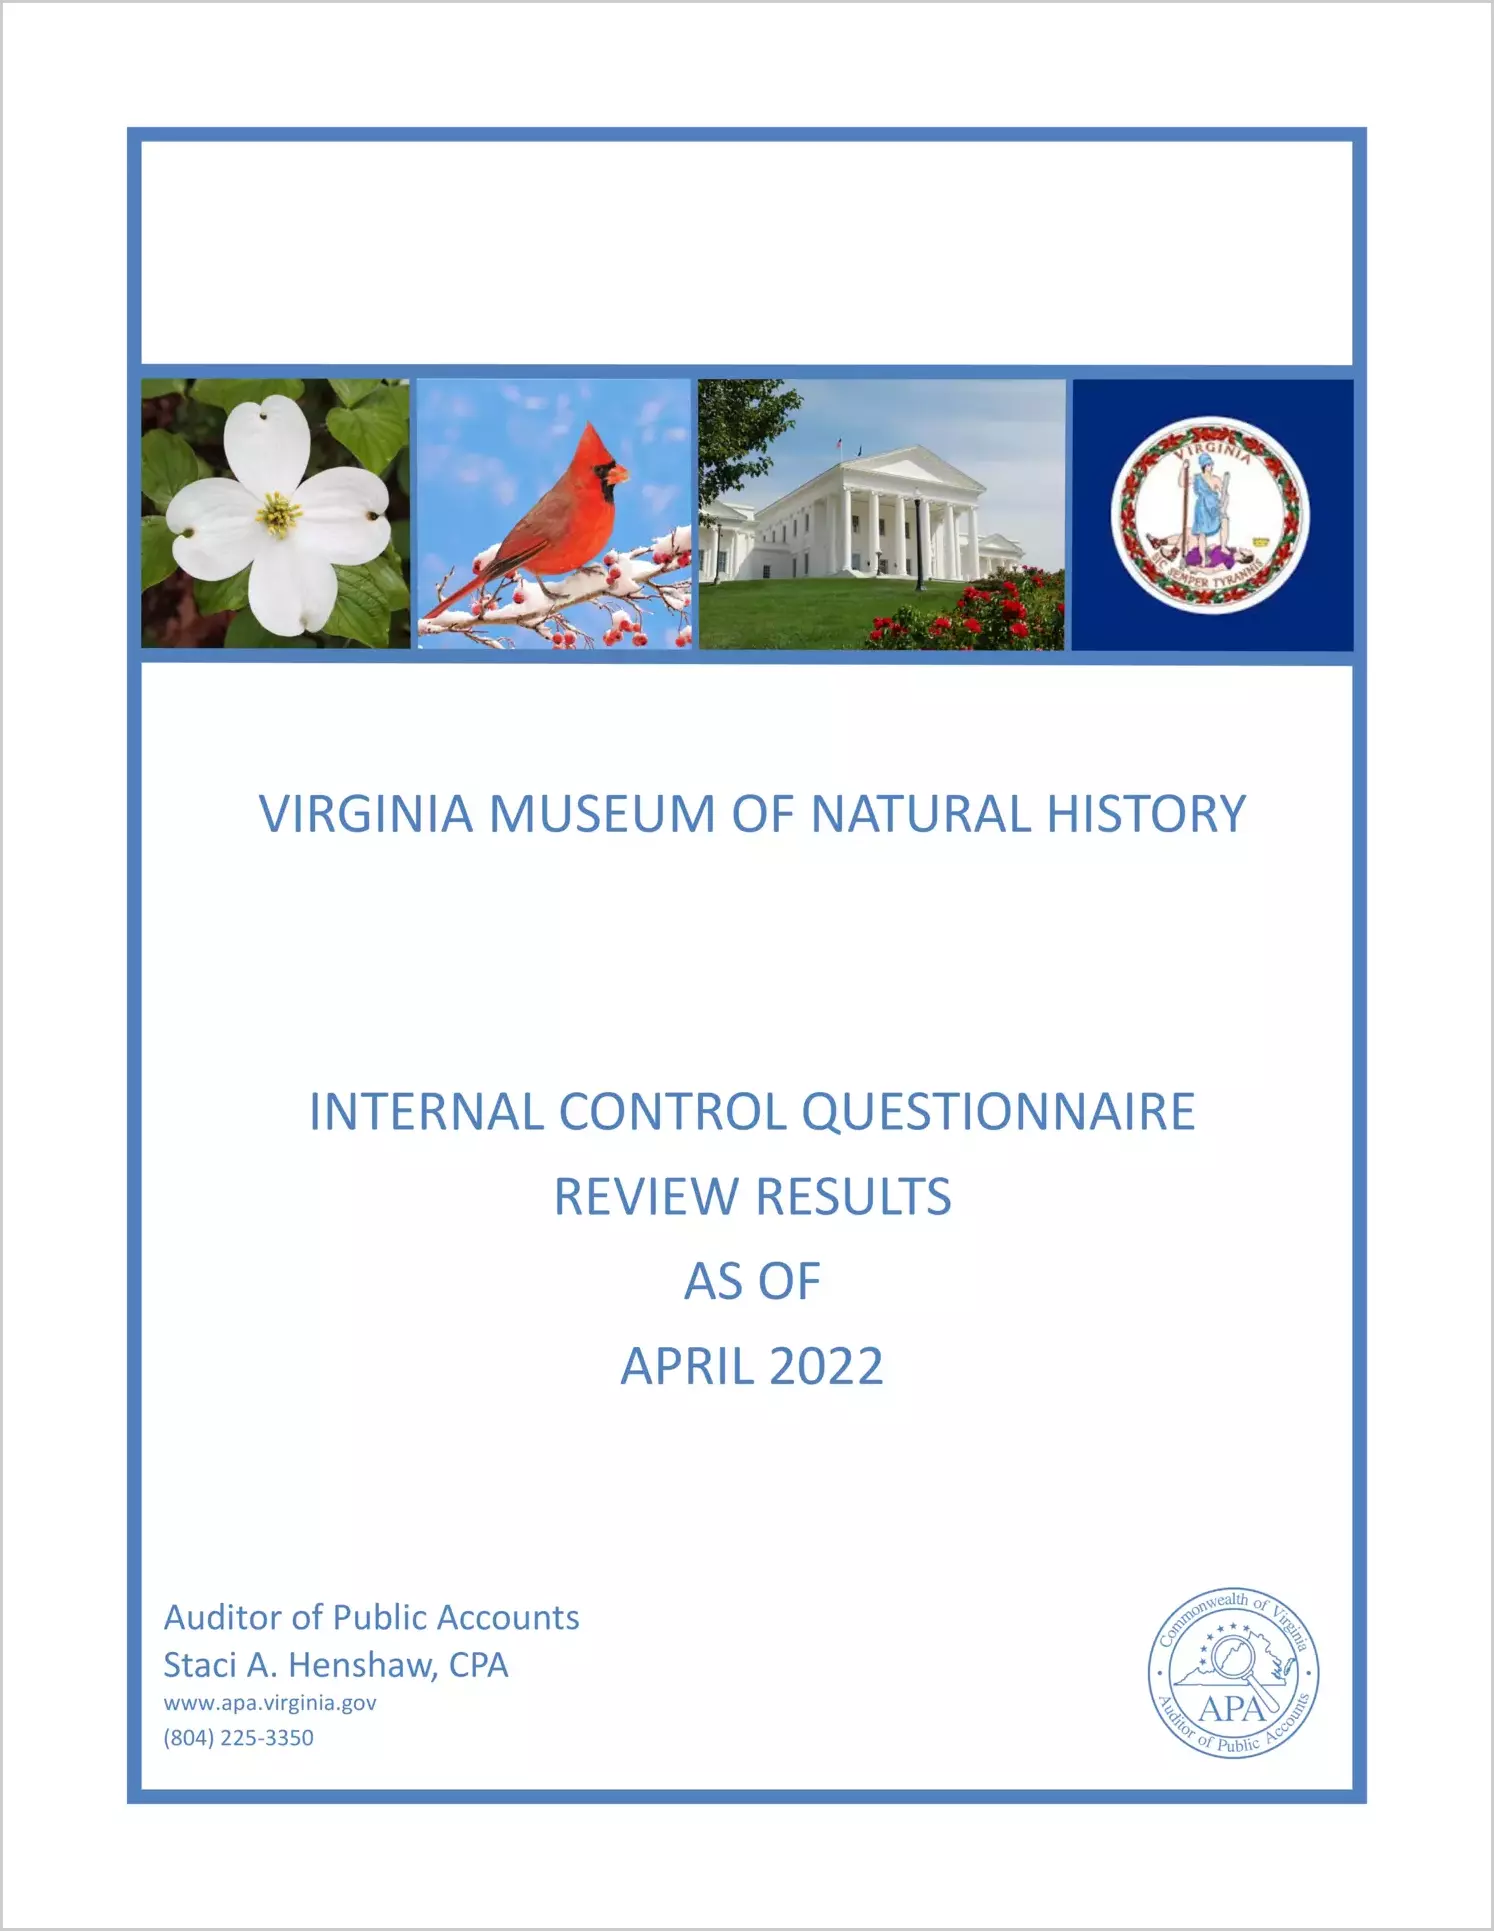 Virginia Museum of Natural History Internal Control Questionnaire Review Results as of April 2022